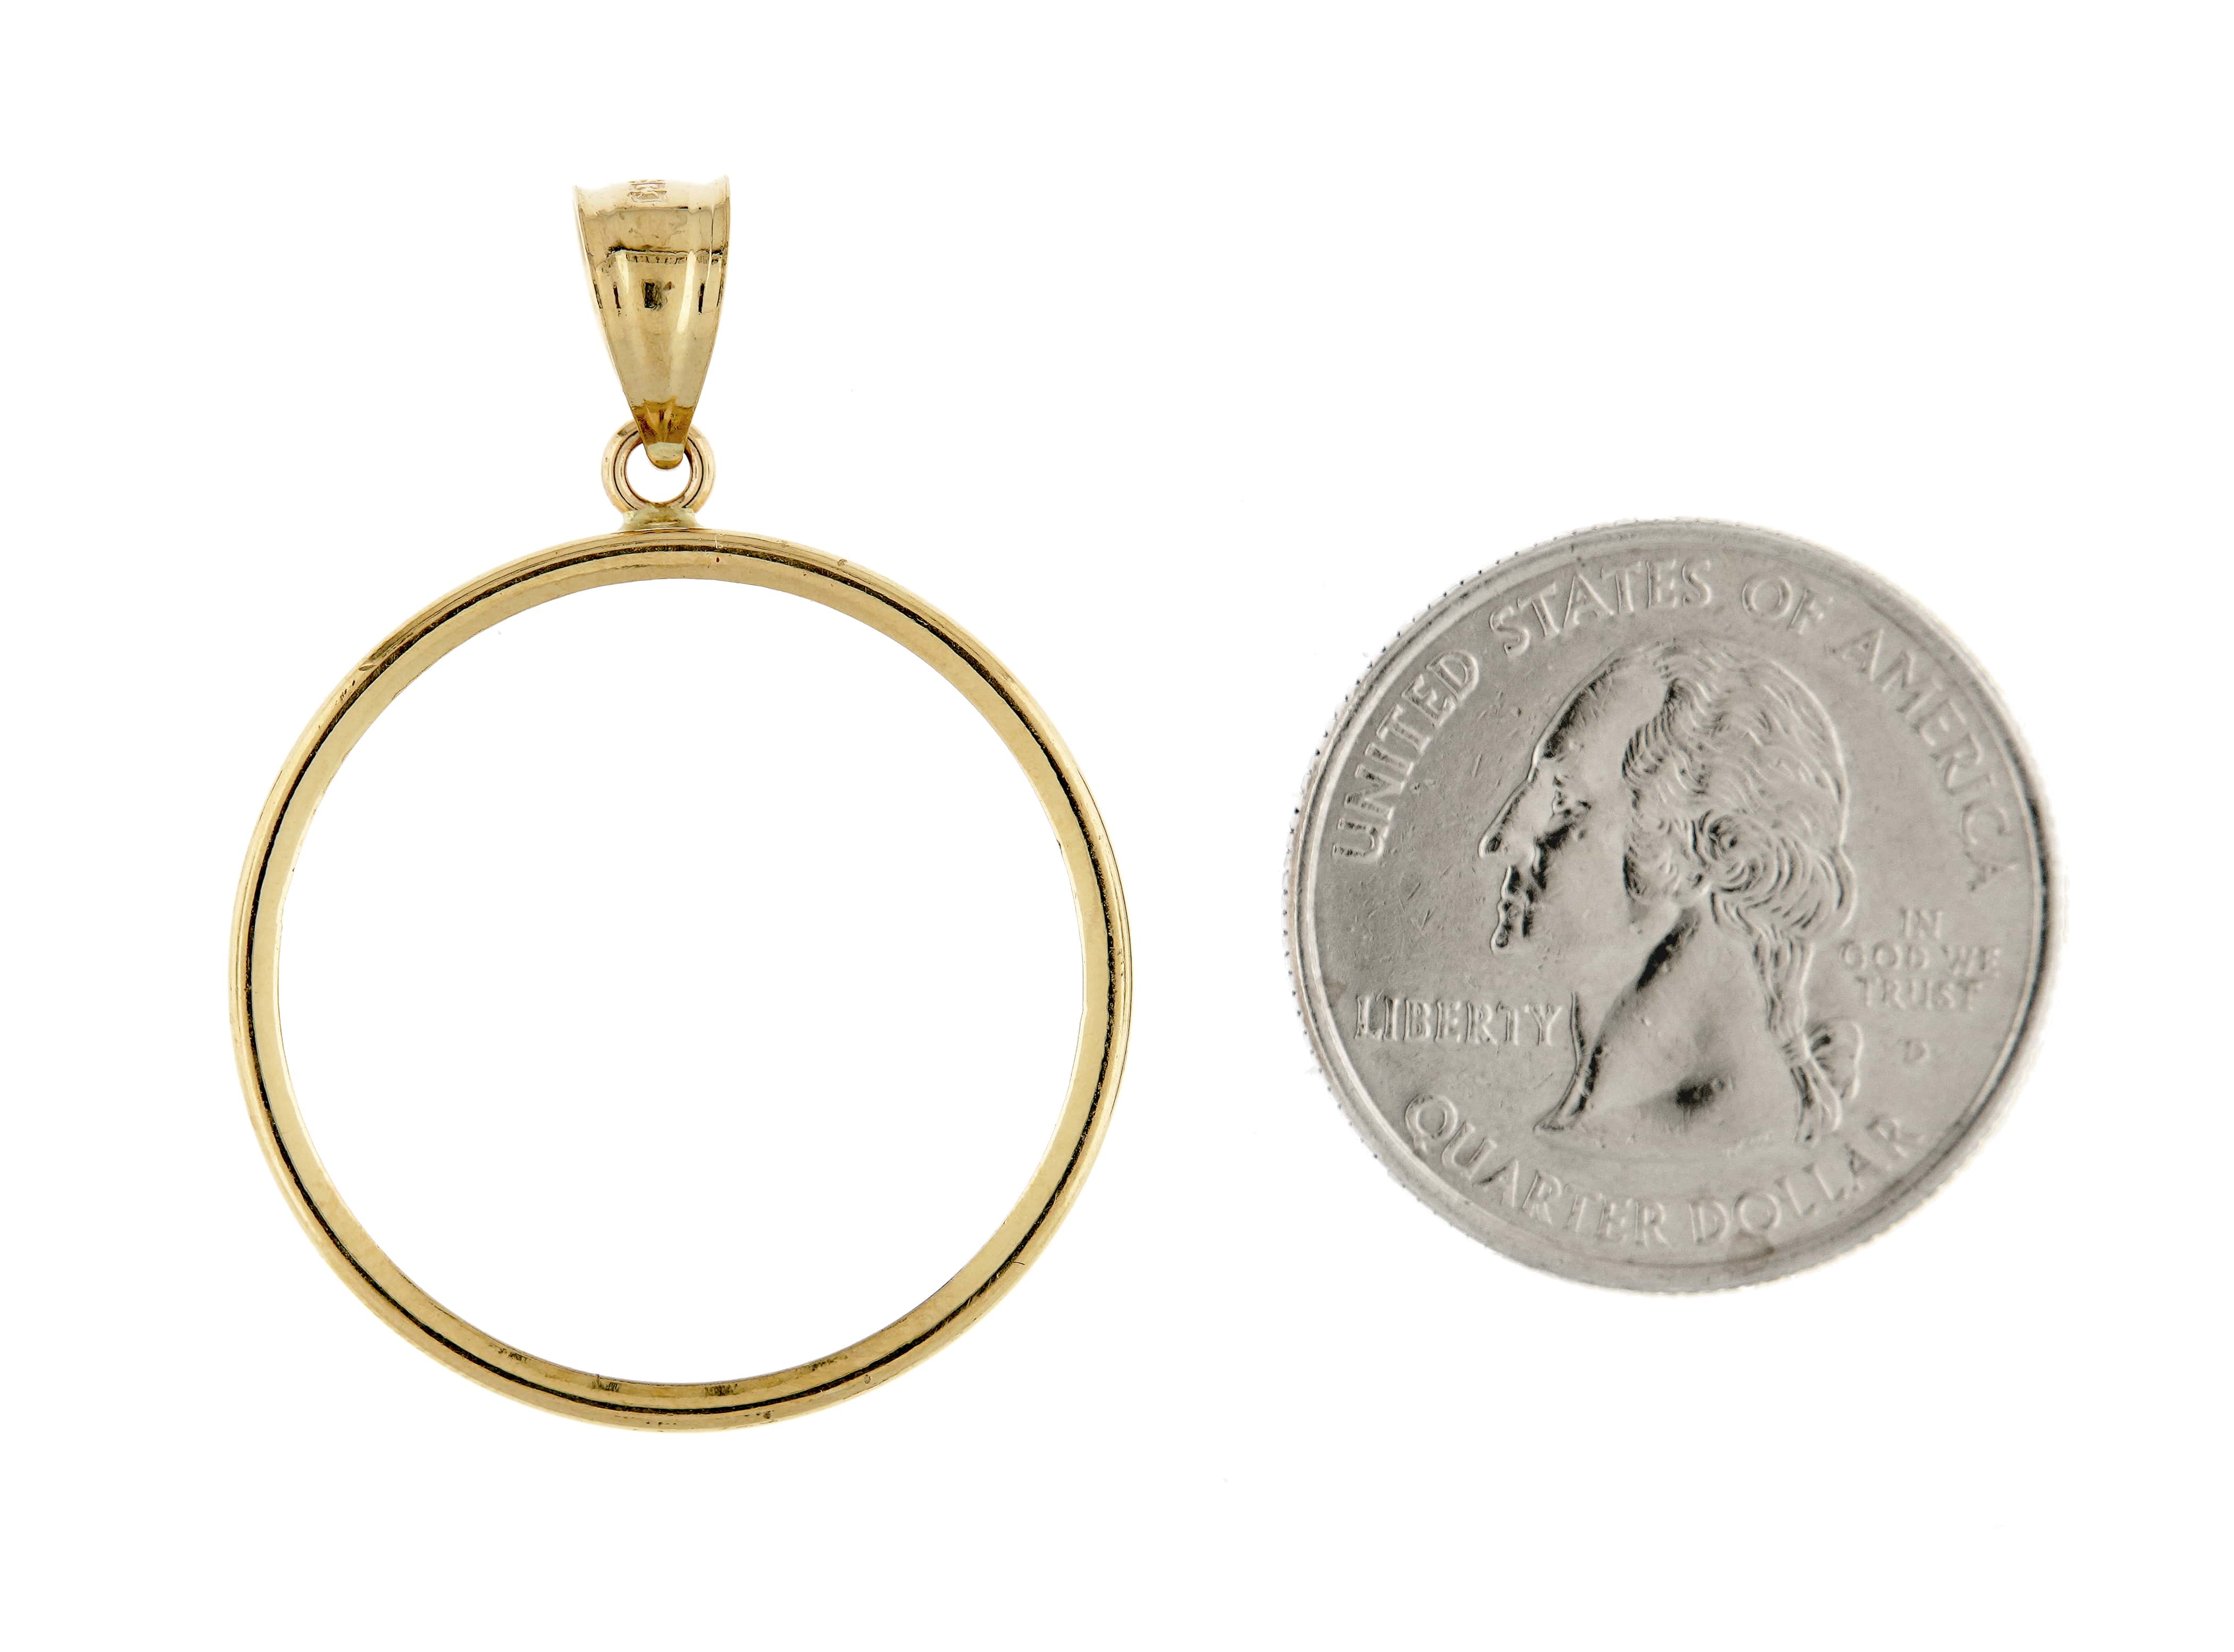 14K Yellow Gold 1/2 oz American Eagle or 1/2 ounce South African Krugerrand Coin Holder Holds 27mm x 2.2mm Coins Tab Back Frame Pendant Charm